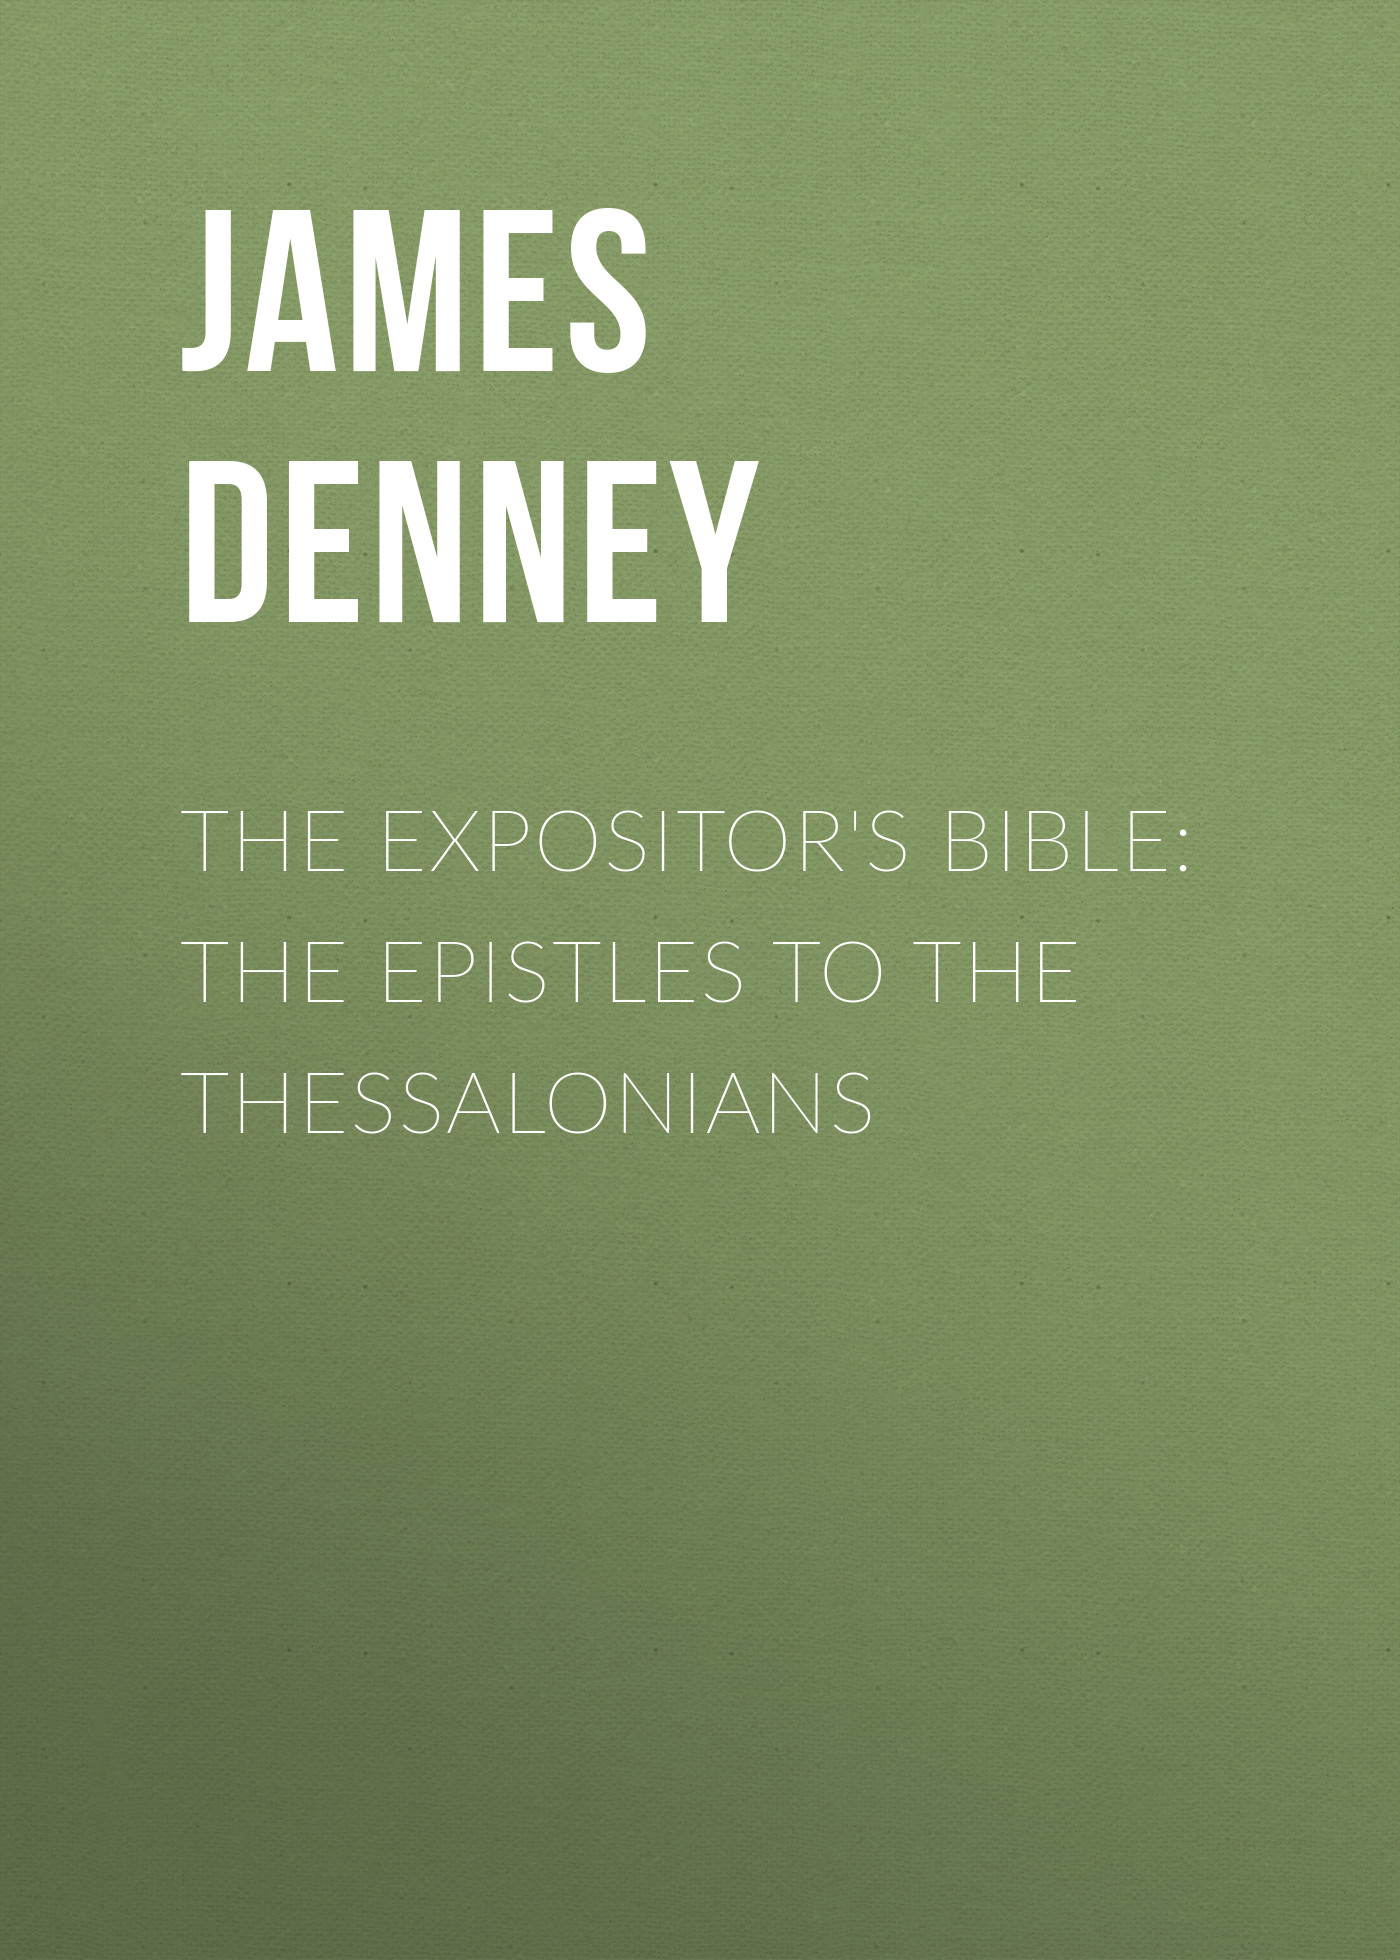 James Denney The Expositor's Bible: The Epistles to the Thessalonians